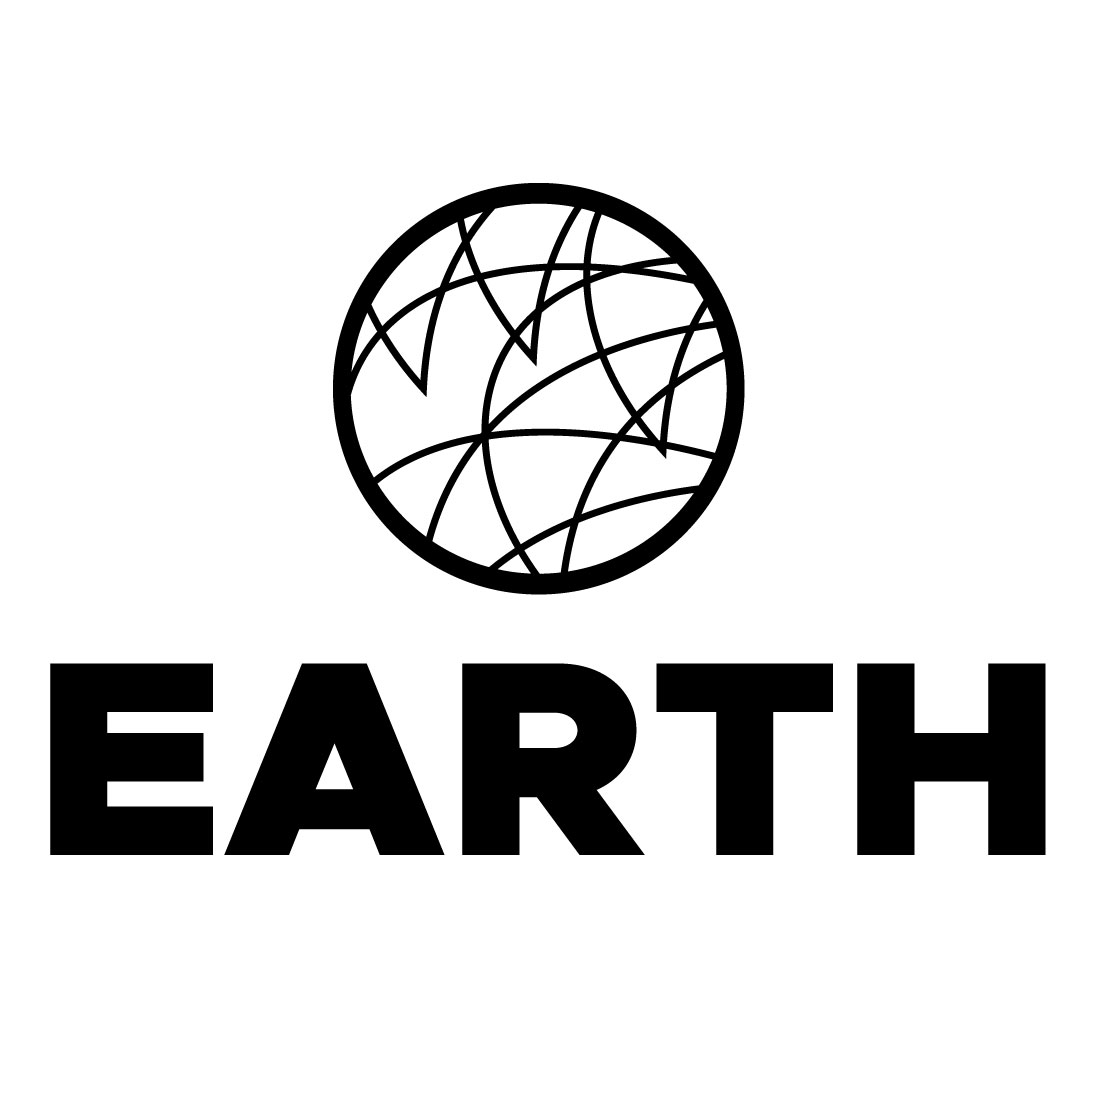 Earth Logo Template cover image.